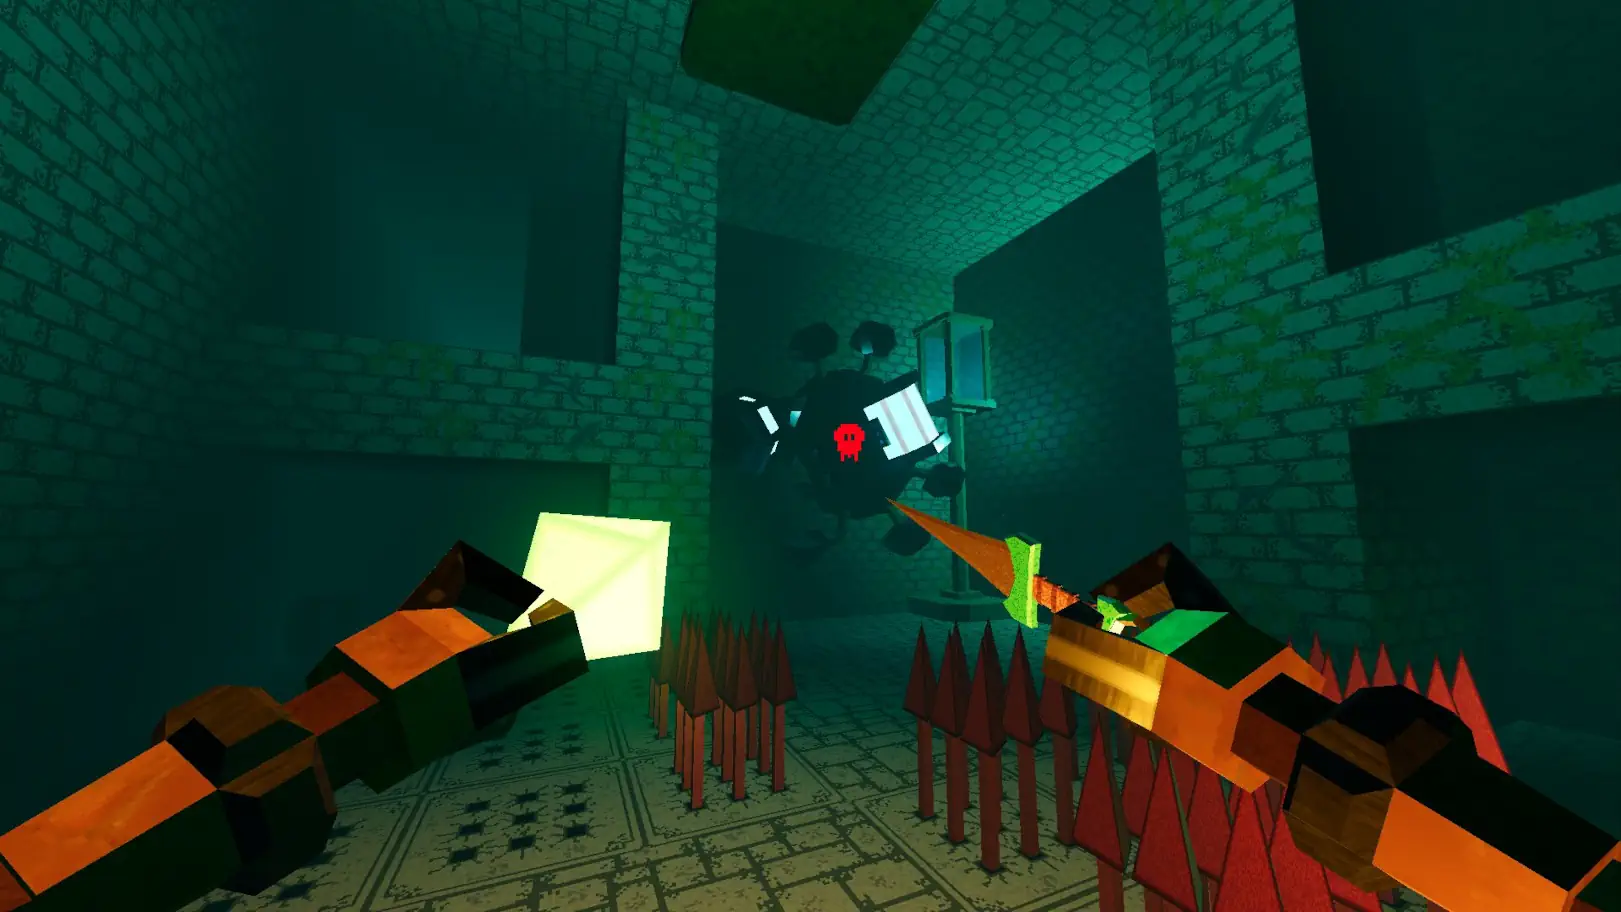 Screenshot of Sunken Shadows featuring the ruins biome, a crab mech enemy and spike traps